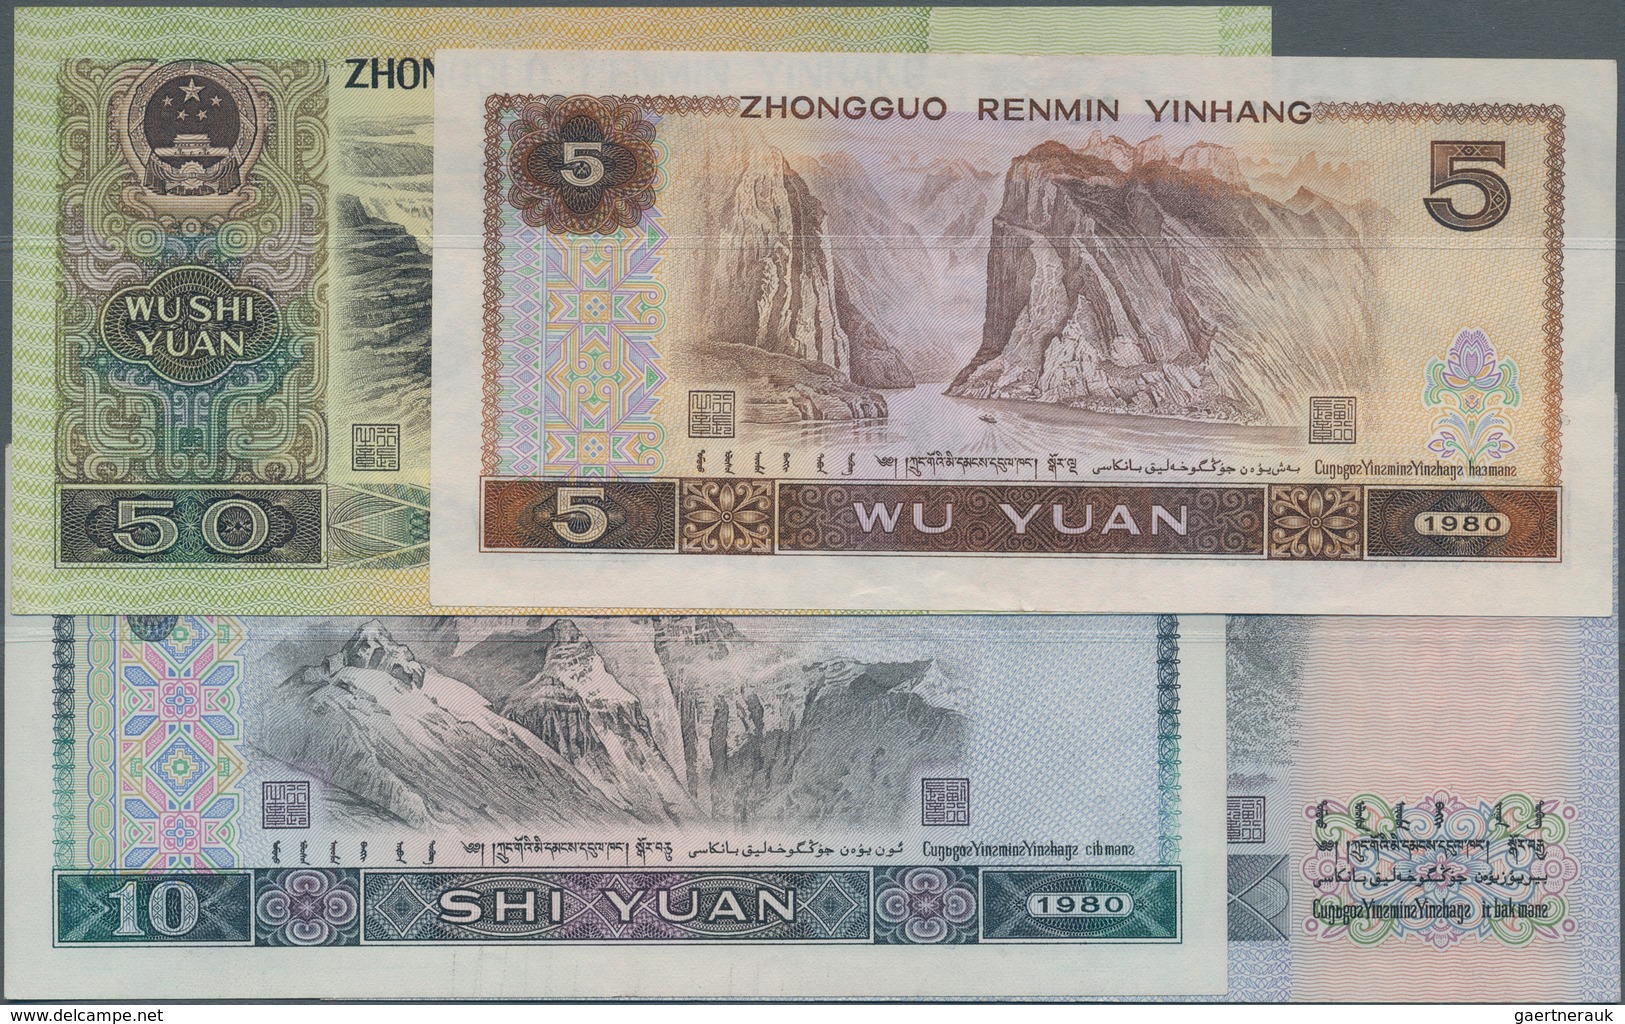 China: Set With 29 Banknotes Of The 1980-1990 Series Including 4 X 1 Jiao P.881a In UNC, 3 X 2 Jiao - China